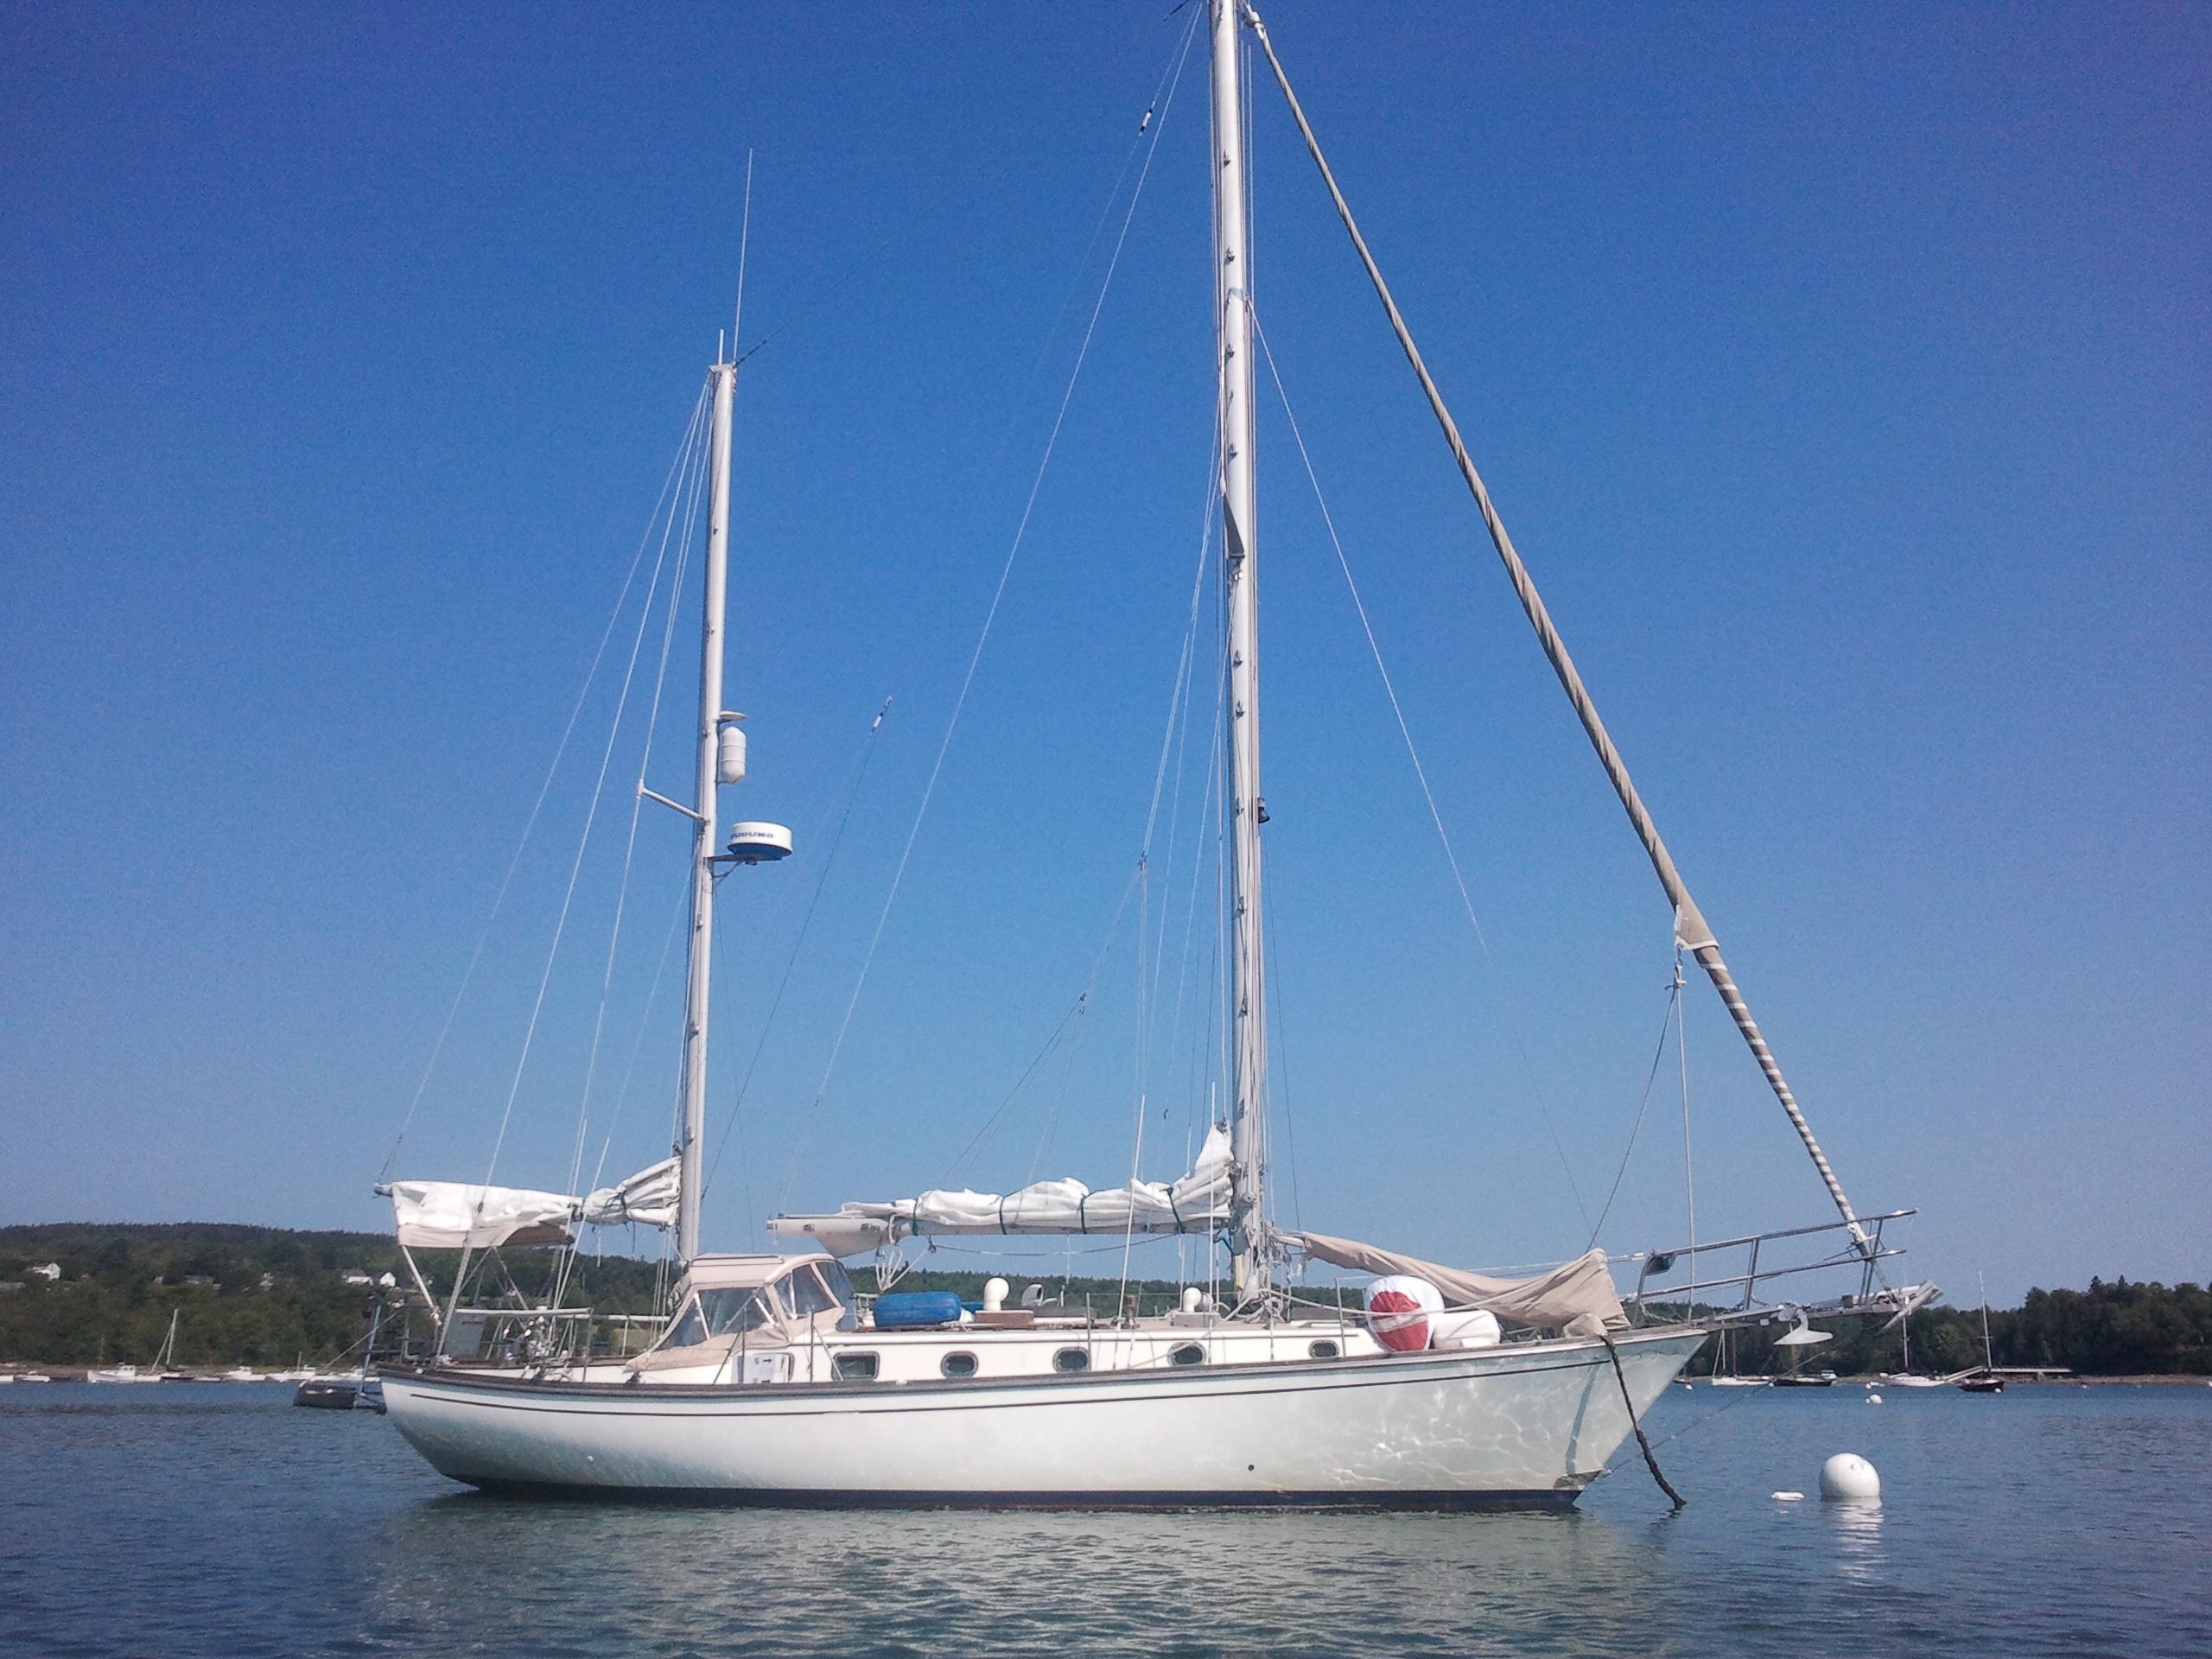 Shannon 38 Double Headsail Ketch